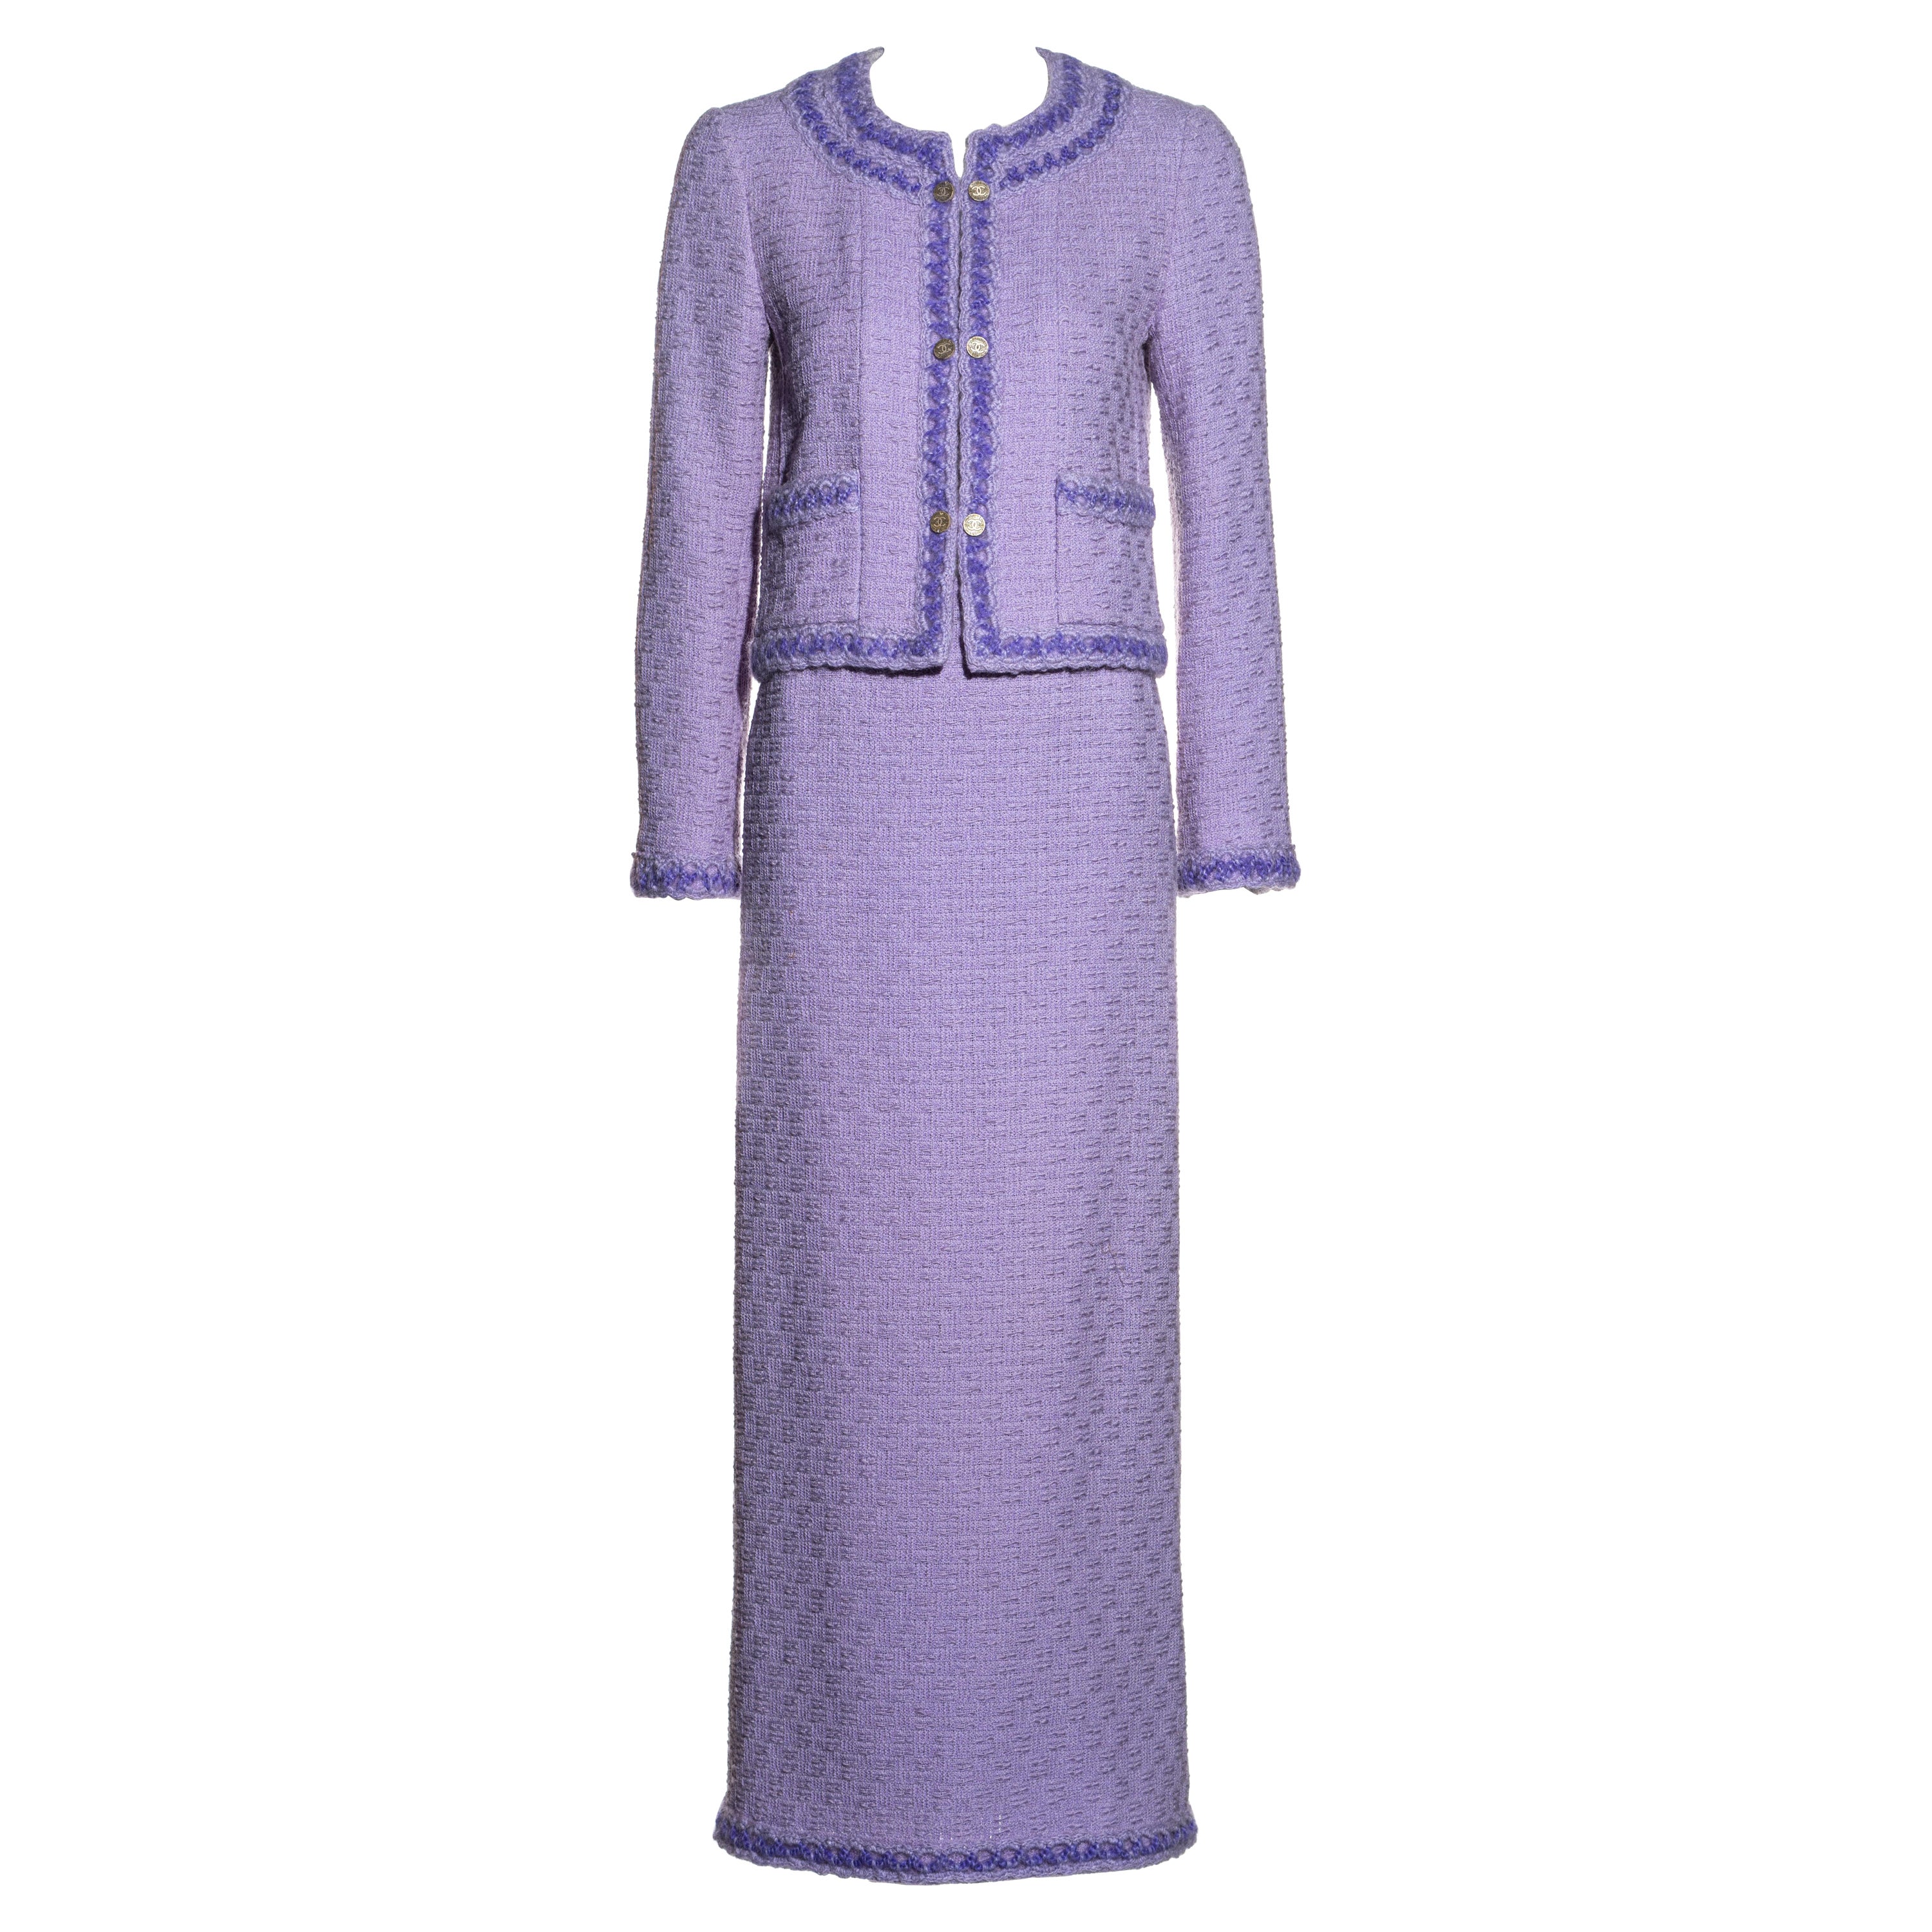 Chanel by Karl Lagerfeld Lilac Tweed Jacket and Maxi Skirt Suit